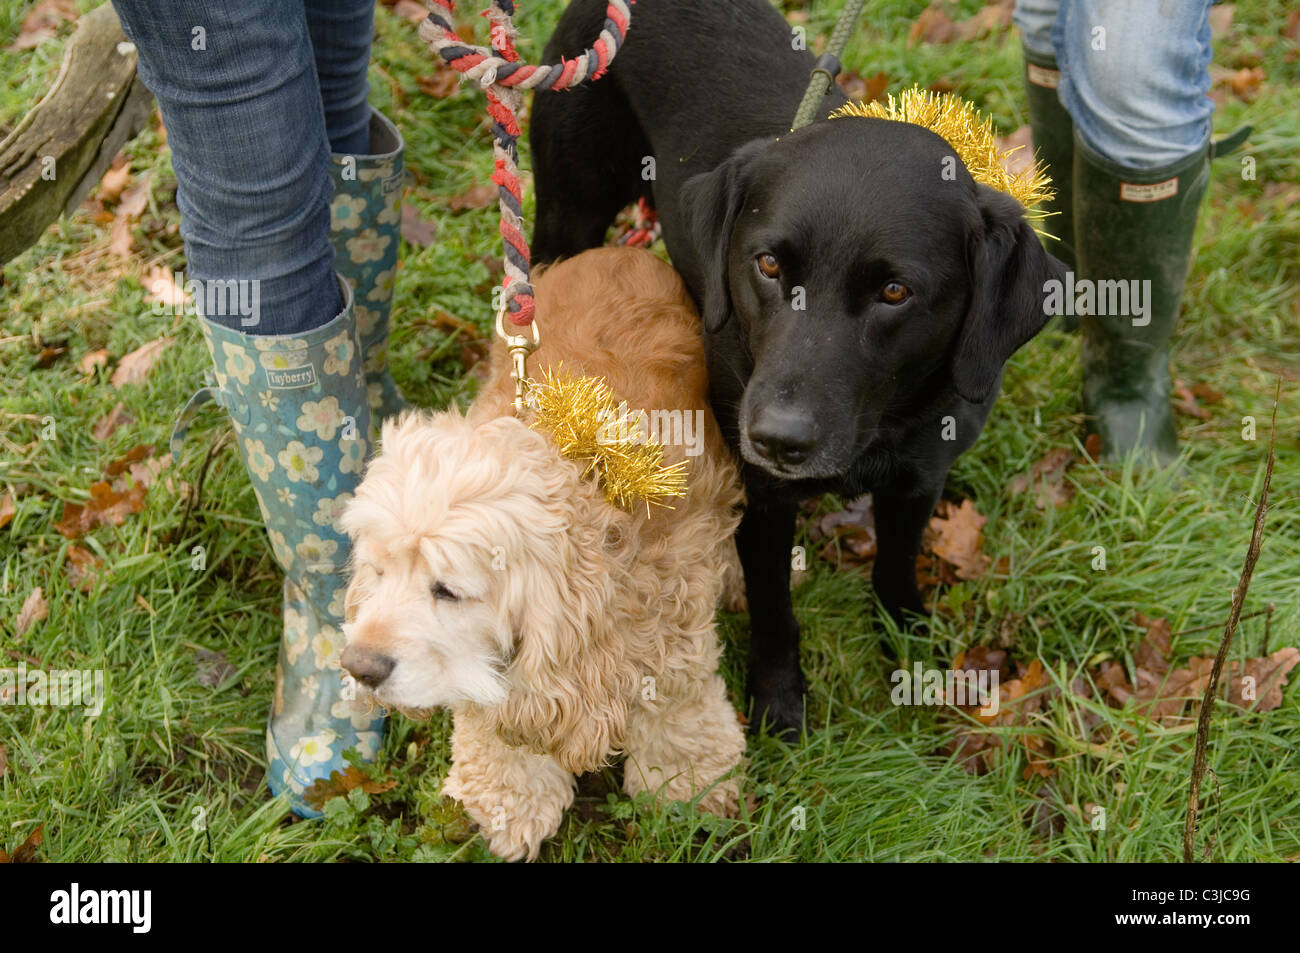 An American cocker spaniel and black Labrador  with tinsel collars in the grass Stock Photo